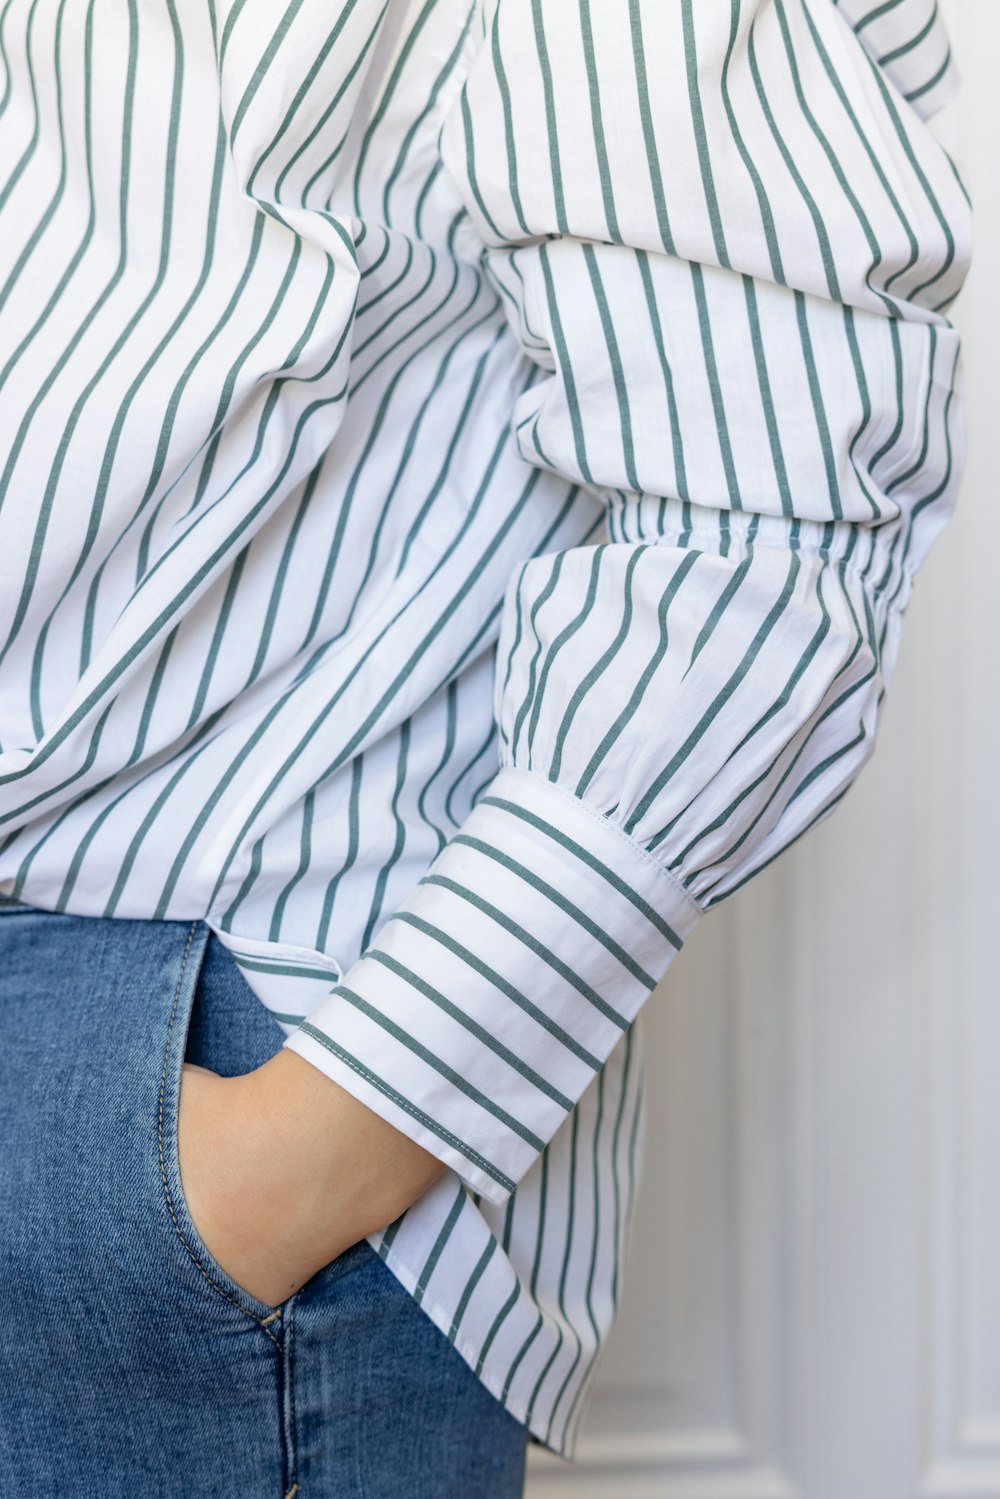 a close up of a person wearing a striped shirt